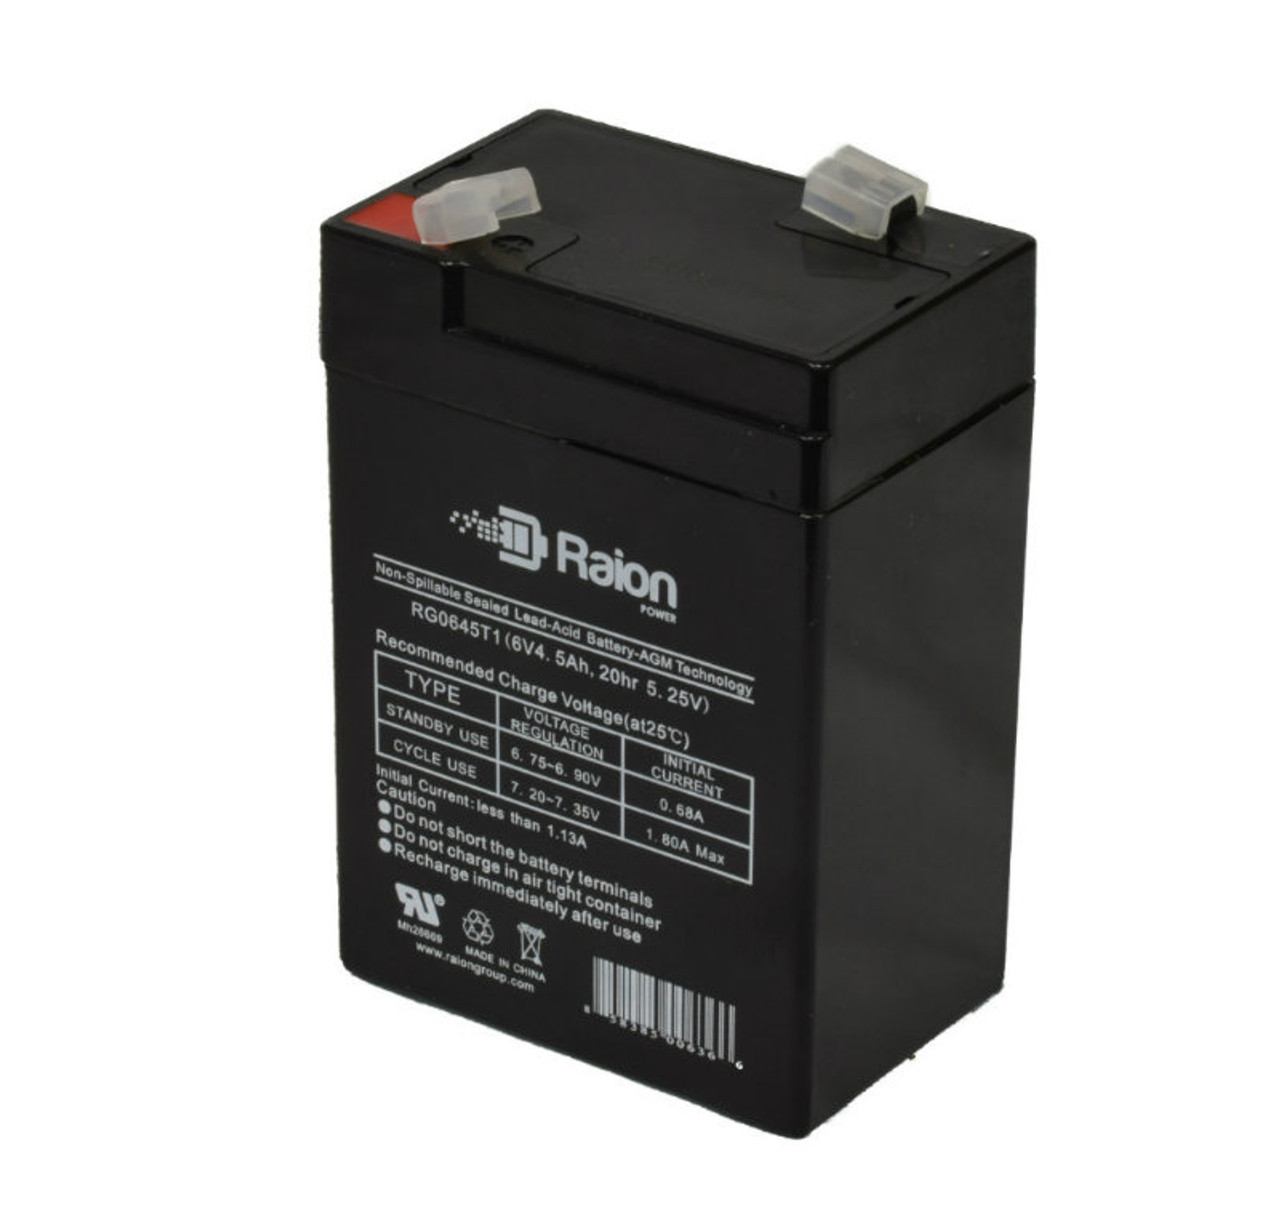 Raion Power RG0645T1 6V 4.5Ah Replacement Battery Cartridge for Holophane M2